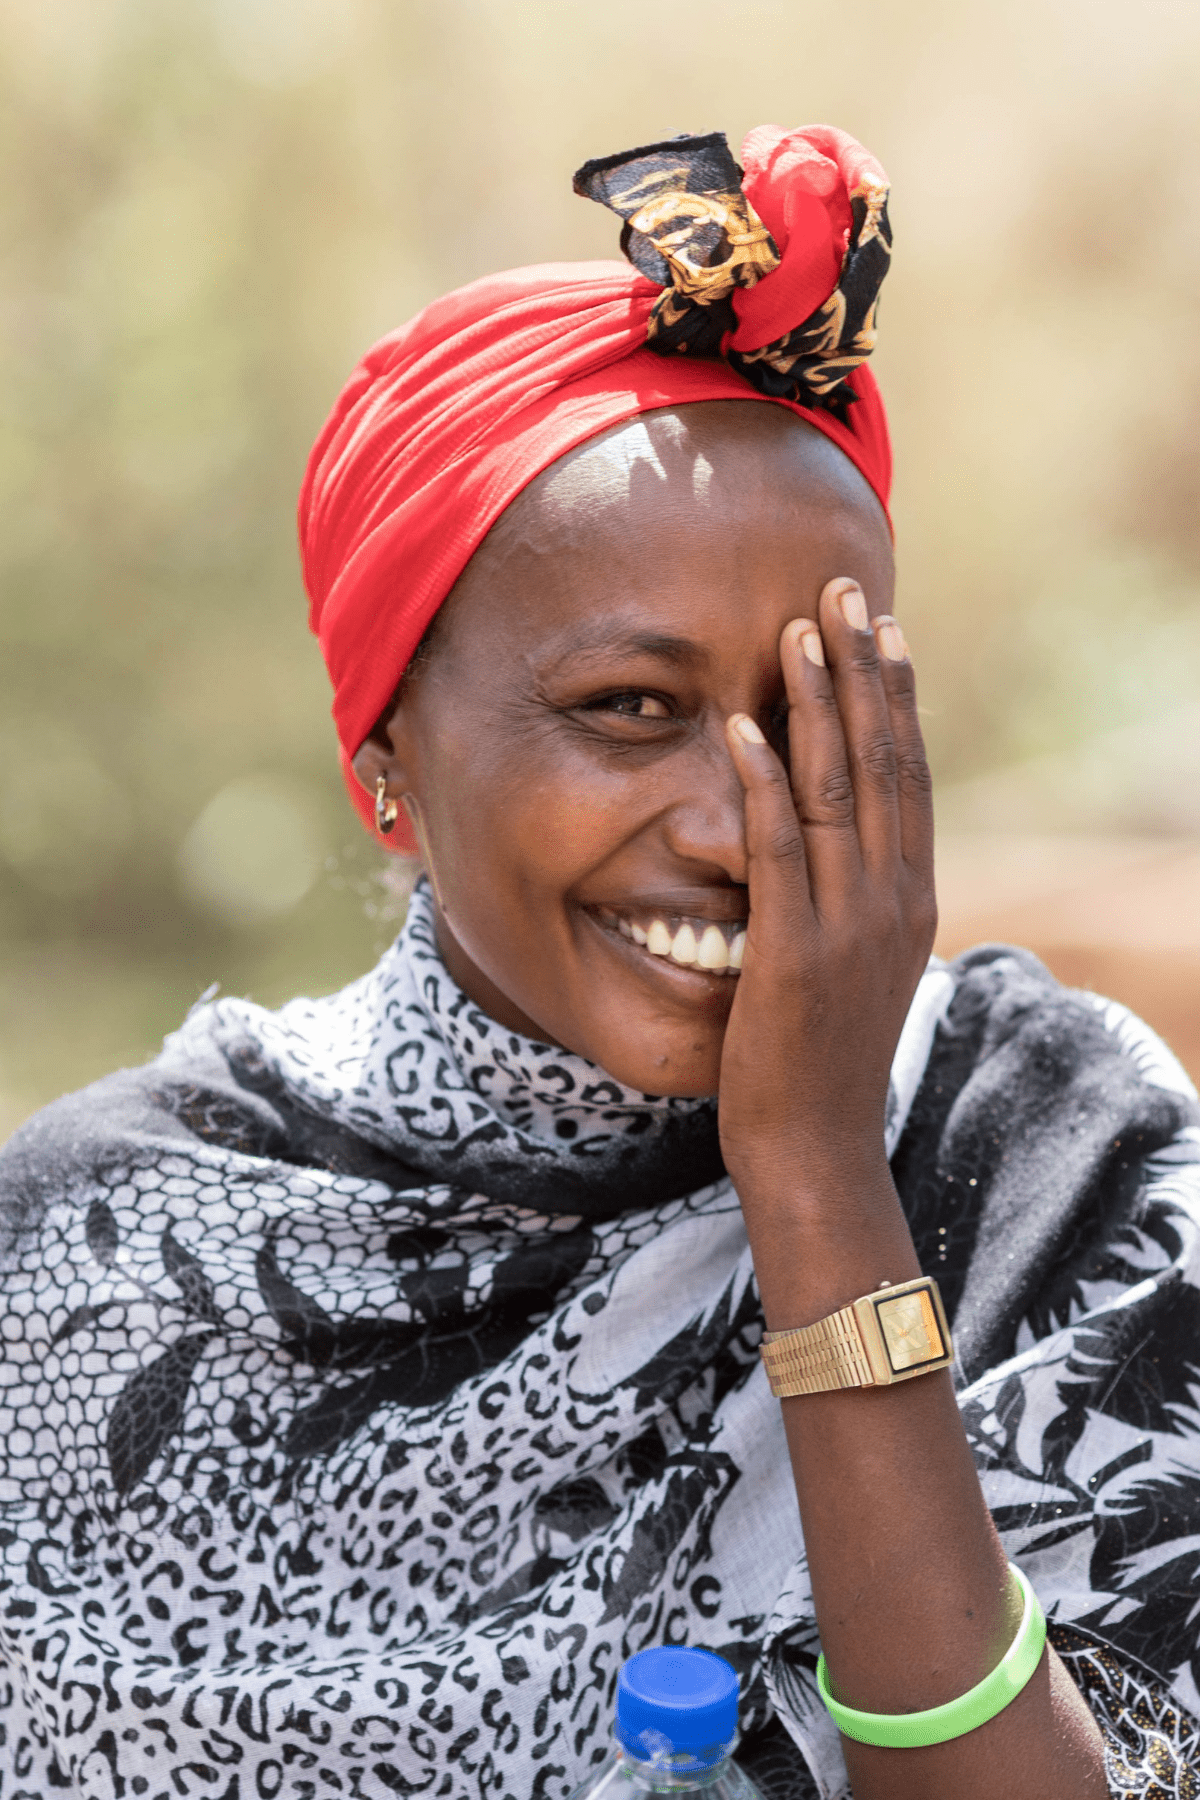 The Good News for Women in East Africa